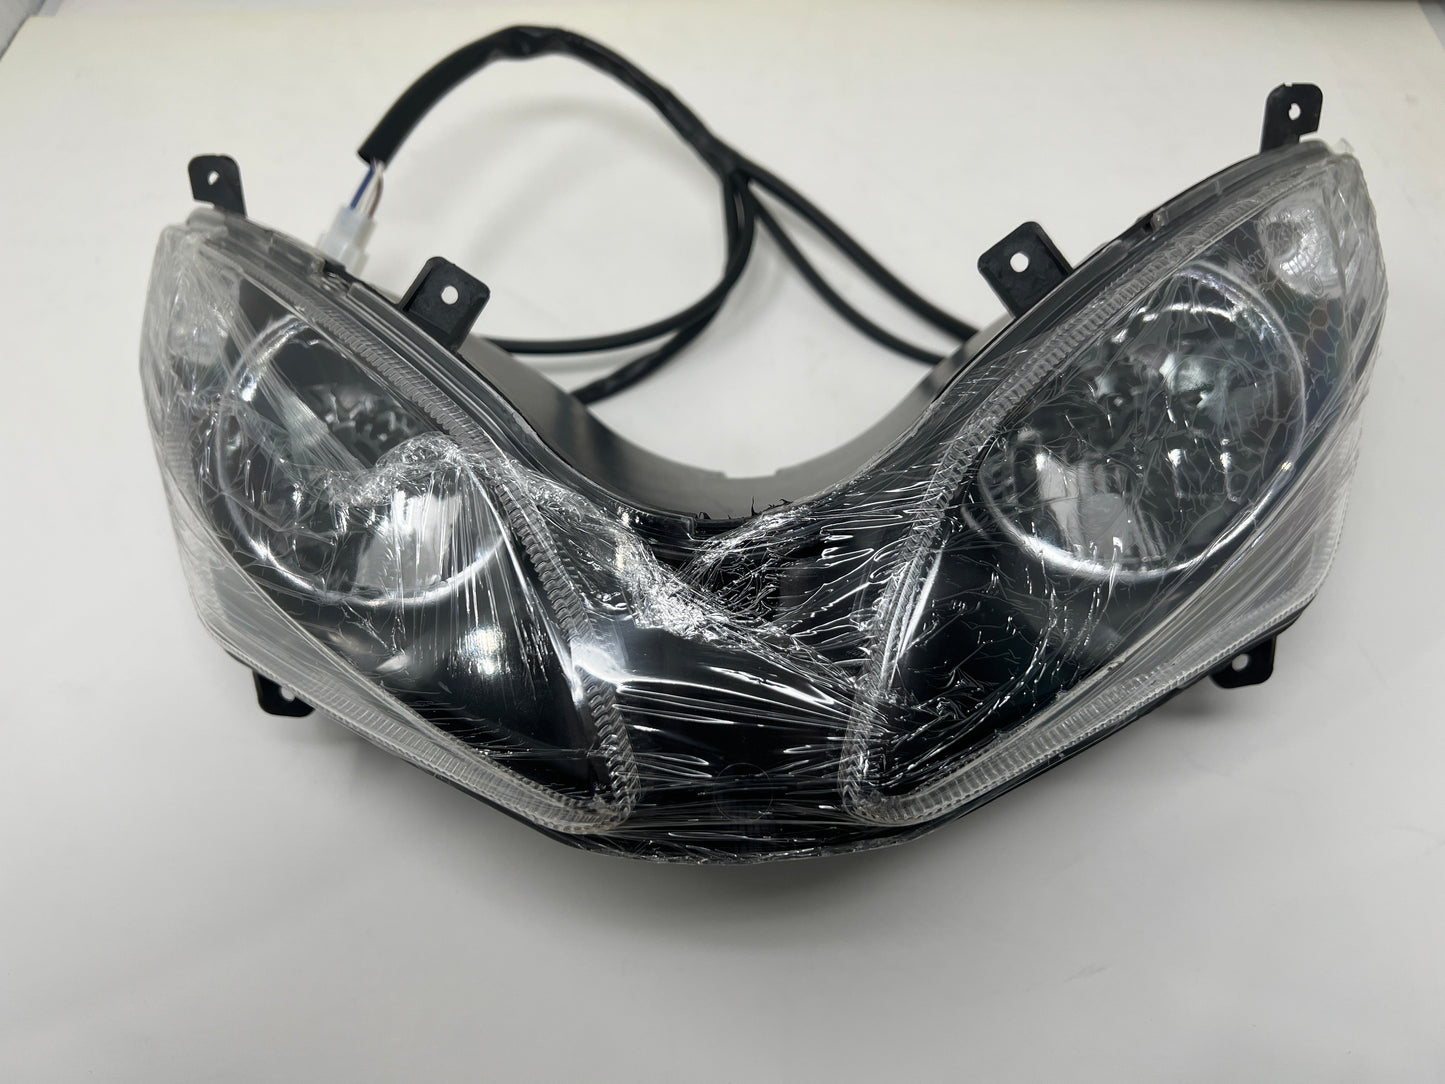 DF250RTS headlight part for sale. Headlight for X22R